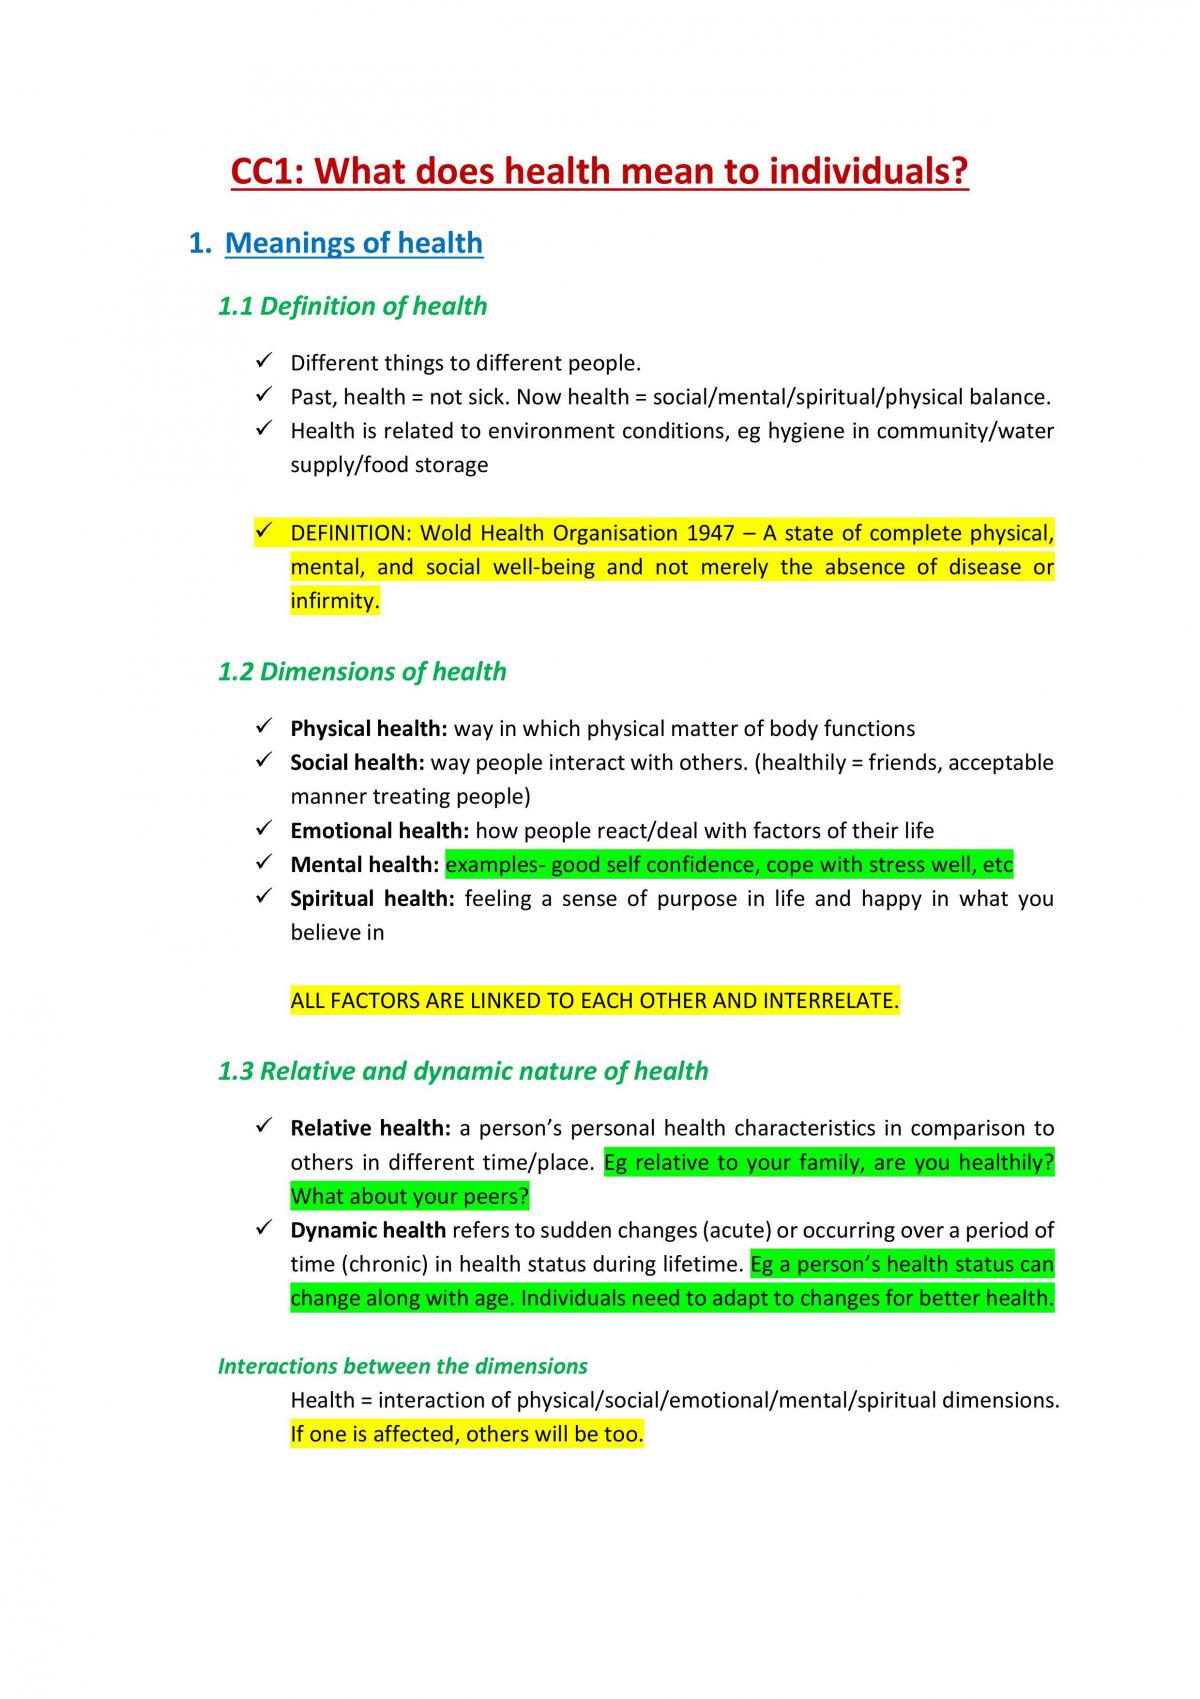 PDHPE Preliminary Core 1: Better Health for Individuals Notes - Page 1